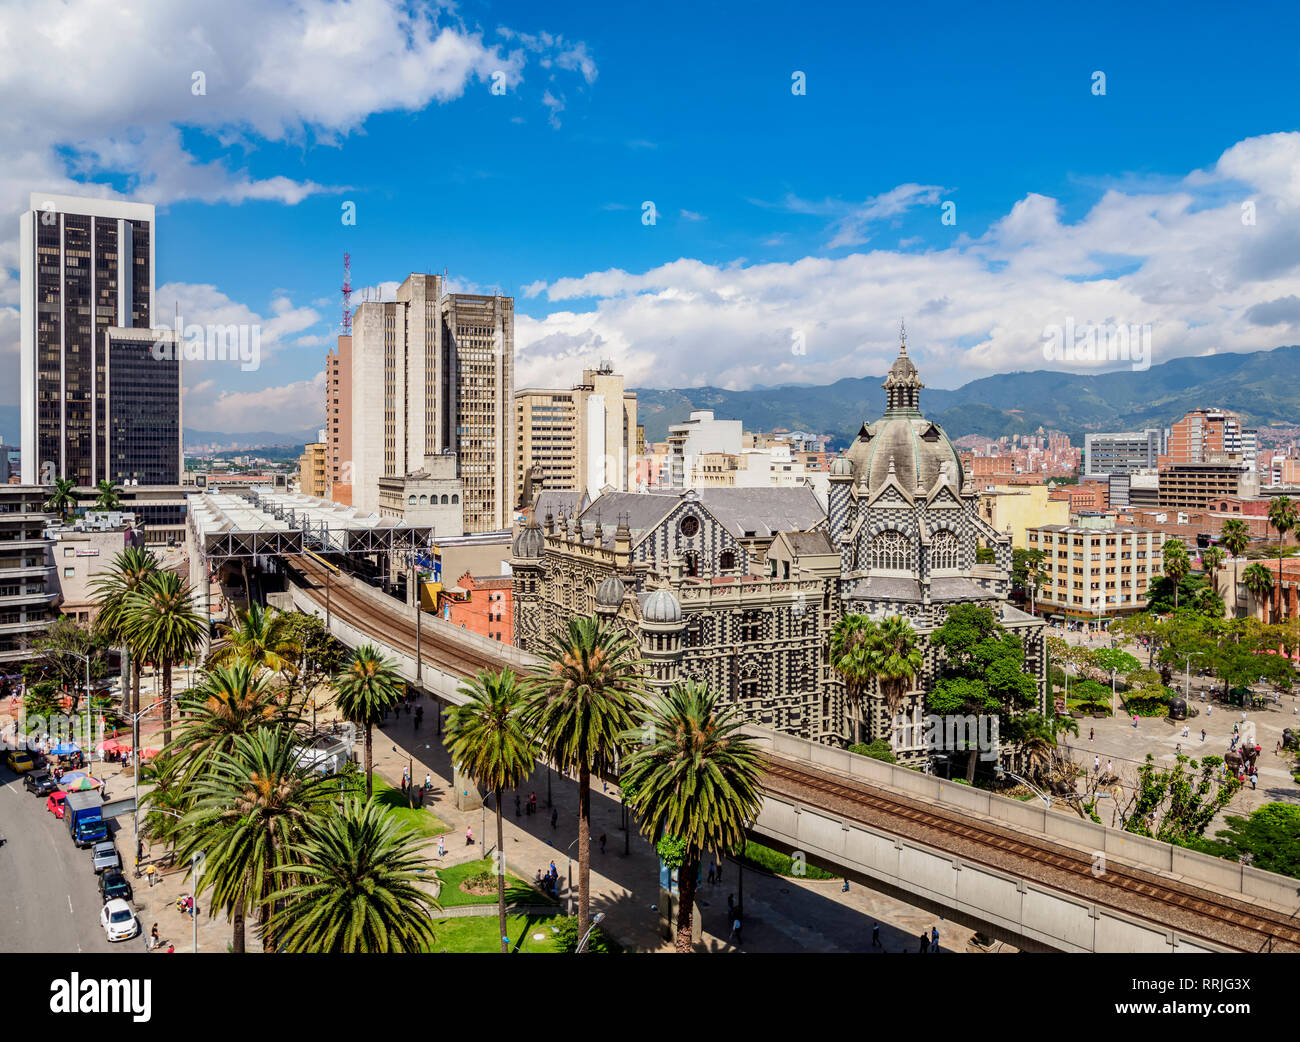 City Center skyline with Metro Line and Rafael Uribe Uribe Palace of Culture, Medellin, Antioquia Department, Colombia, South America Stock Photo